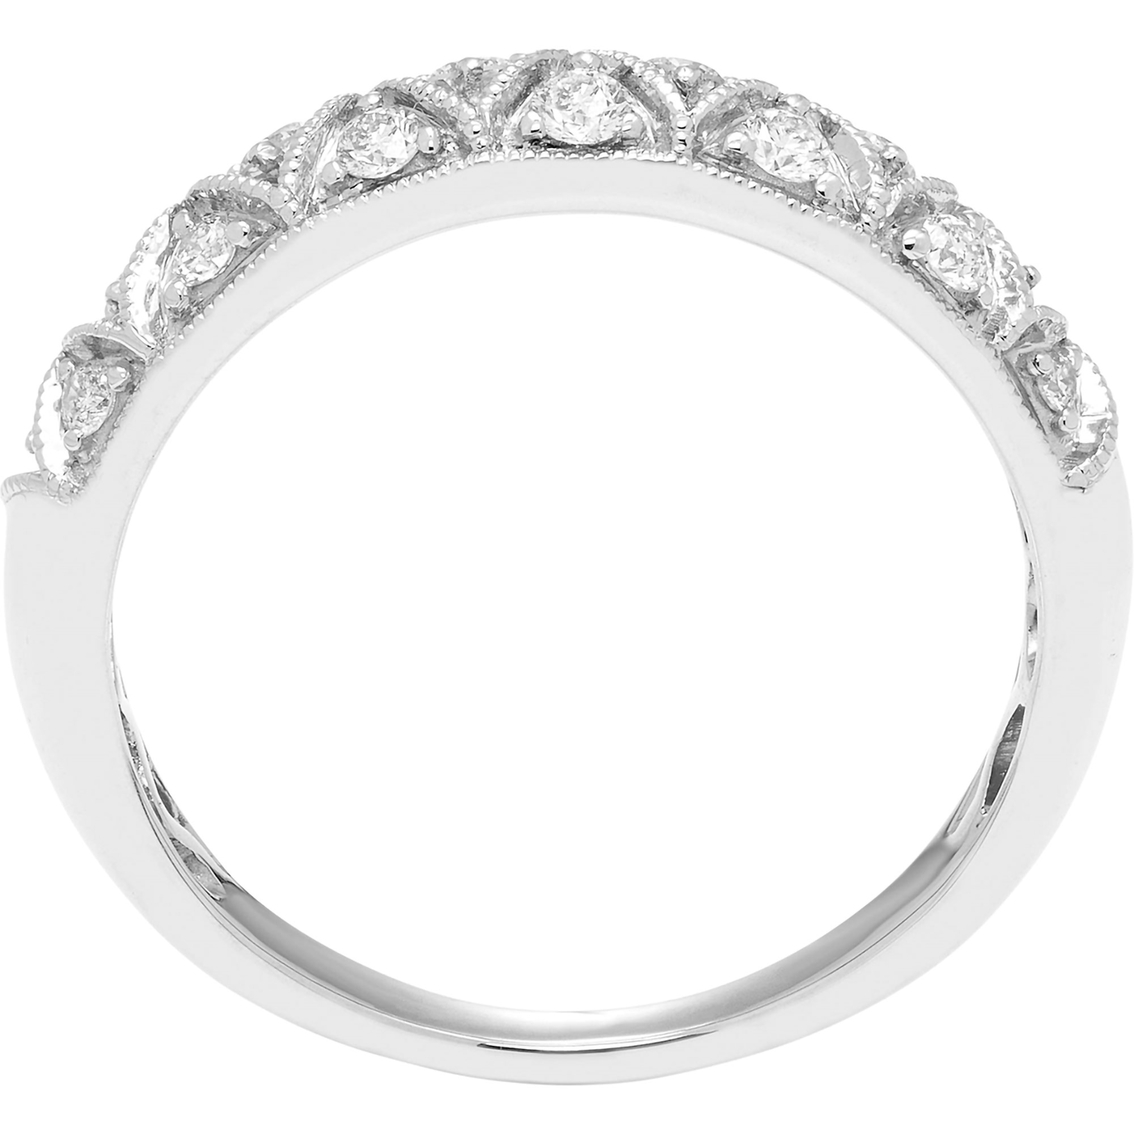 14K Gold 1/4 CTW Certified Diamond Band - Image 3 of 3